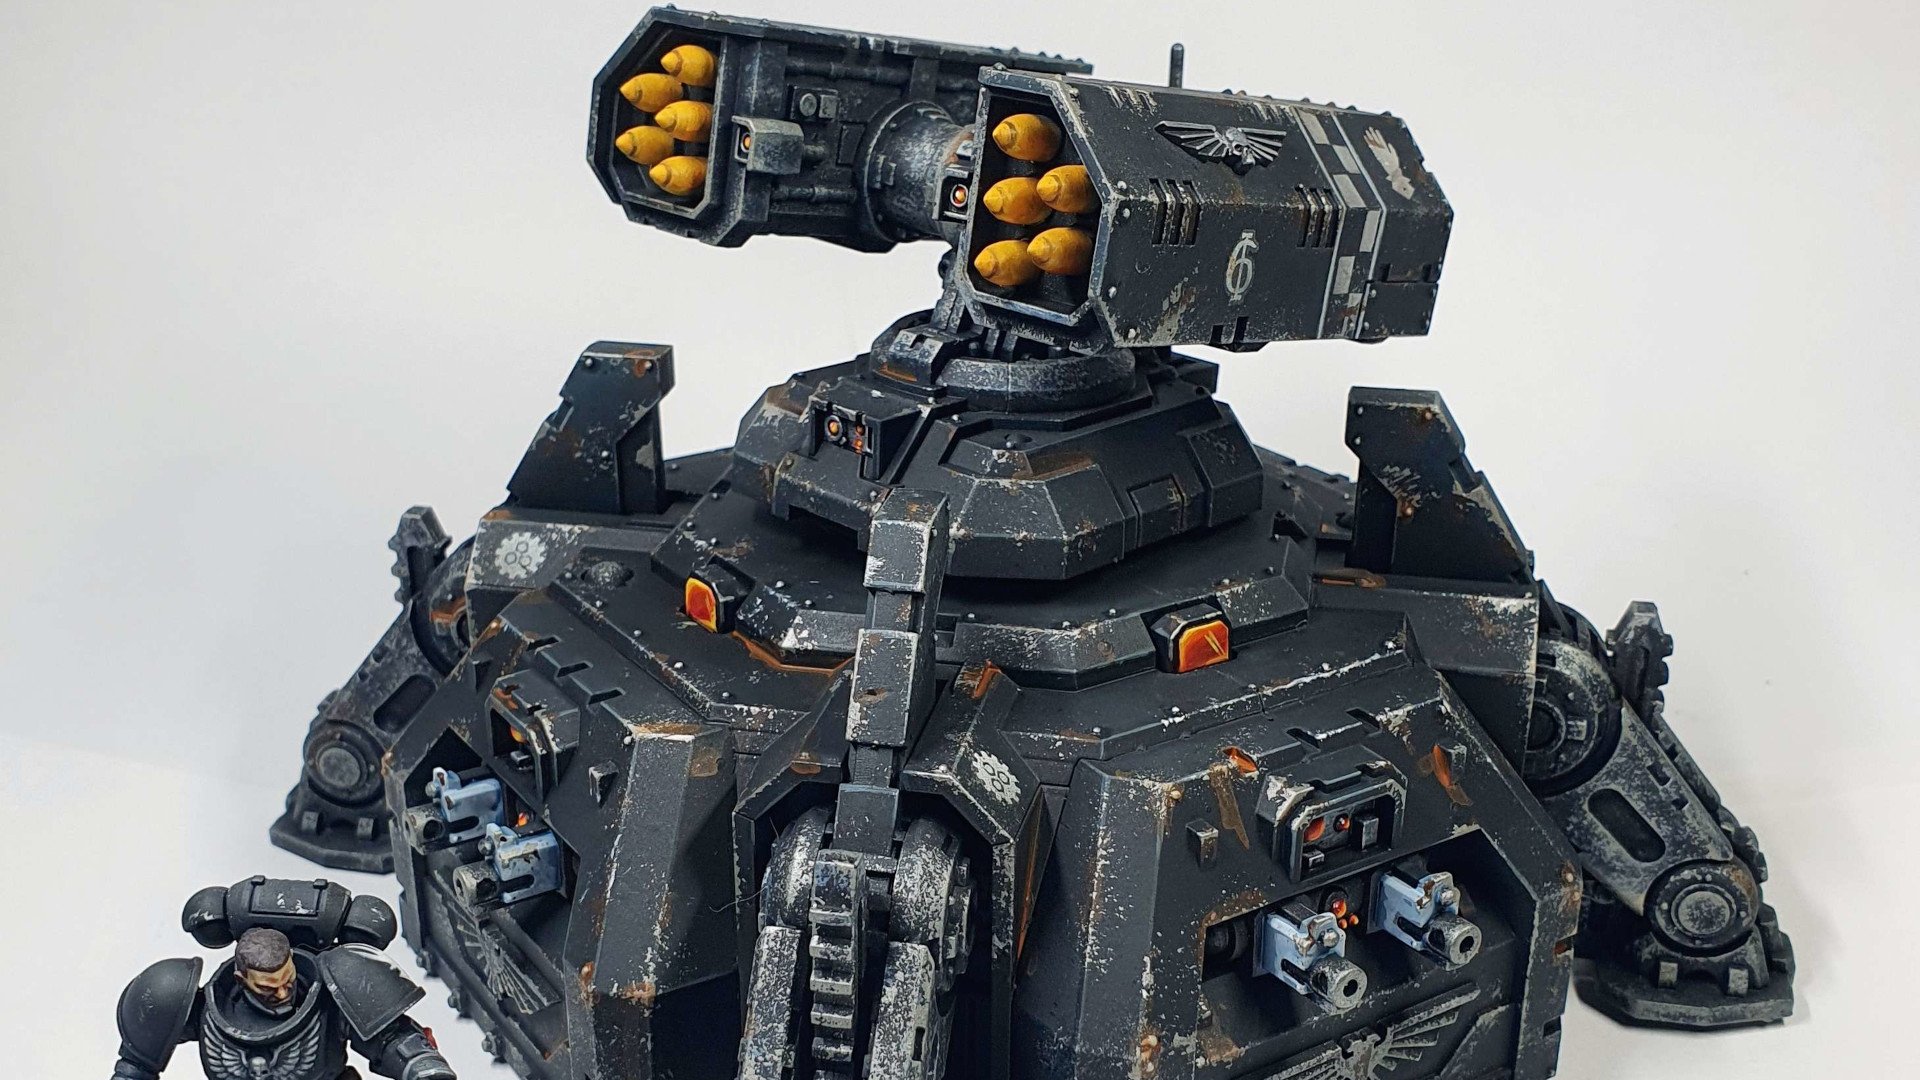 Warhammer 40k Iron Hands hammerfall bunker - an automated defence emplacement and SAM site, painted by Gonders